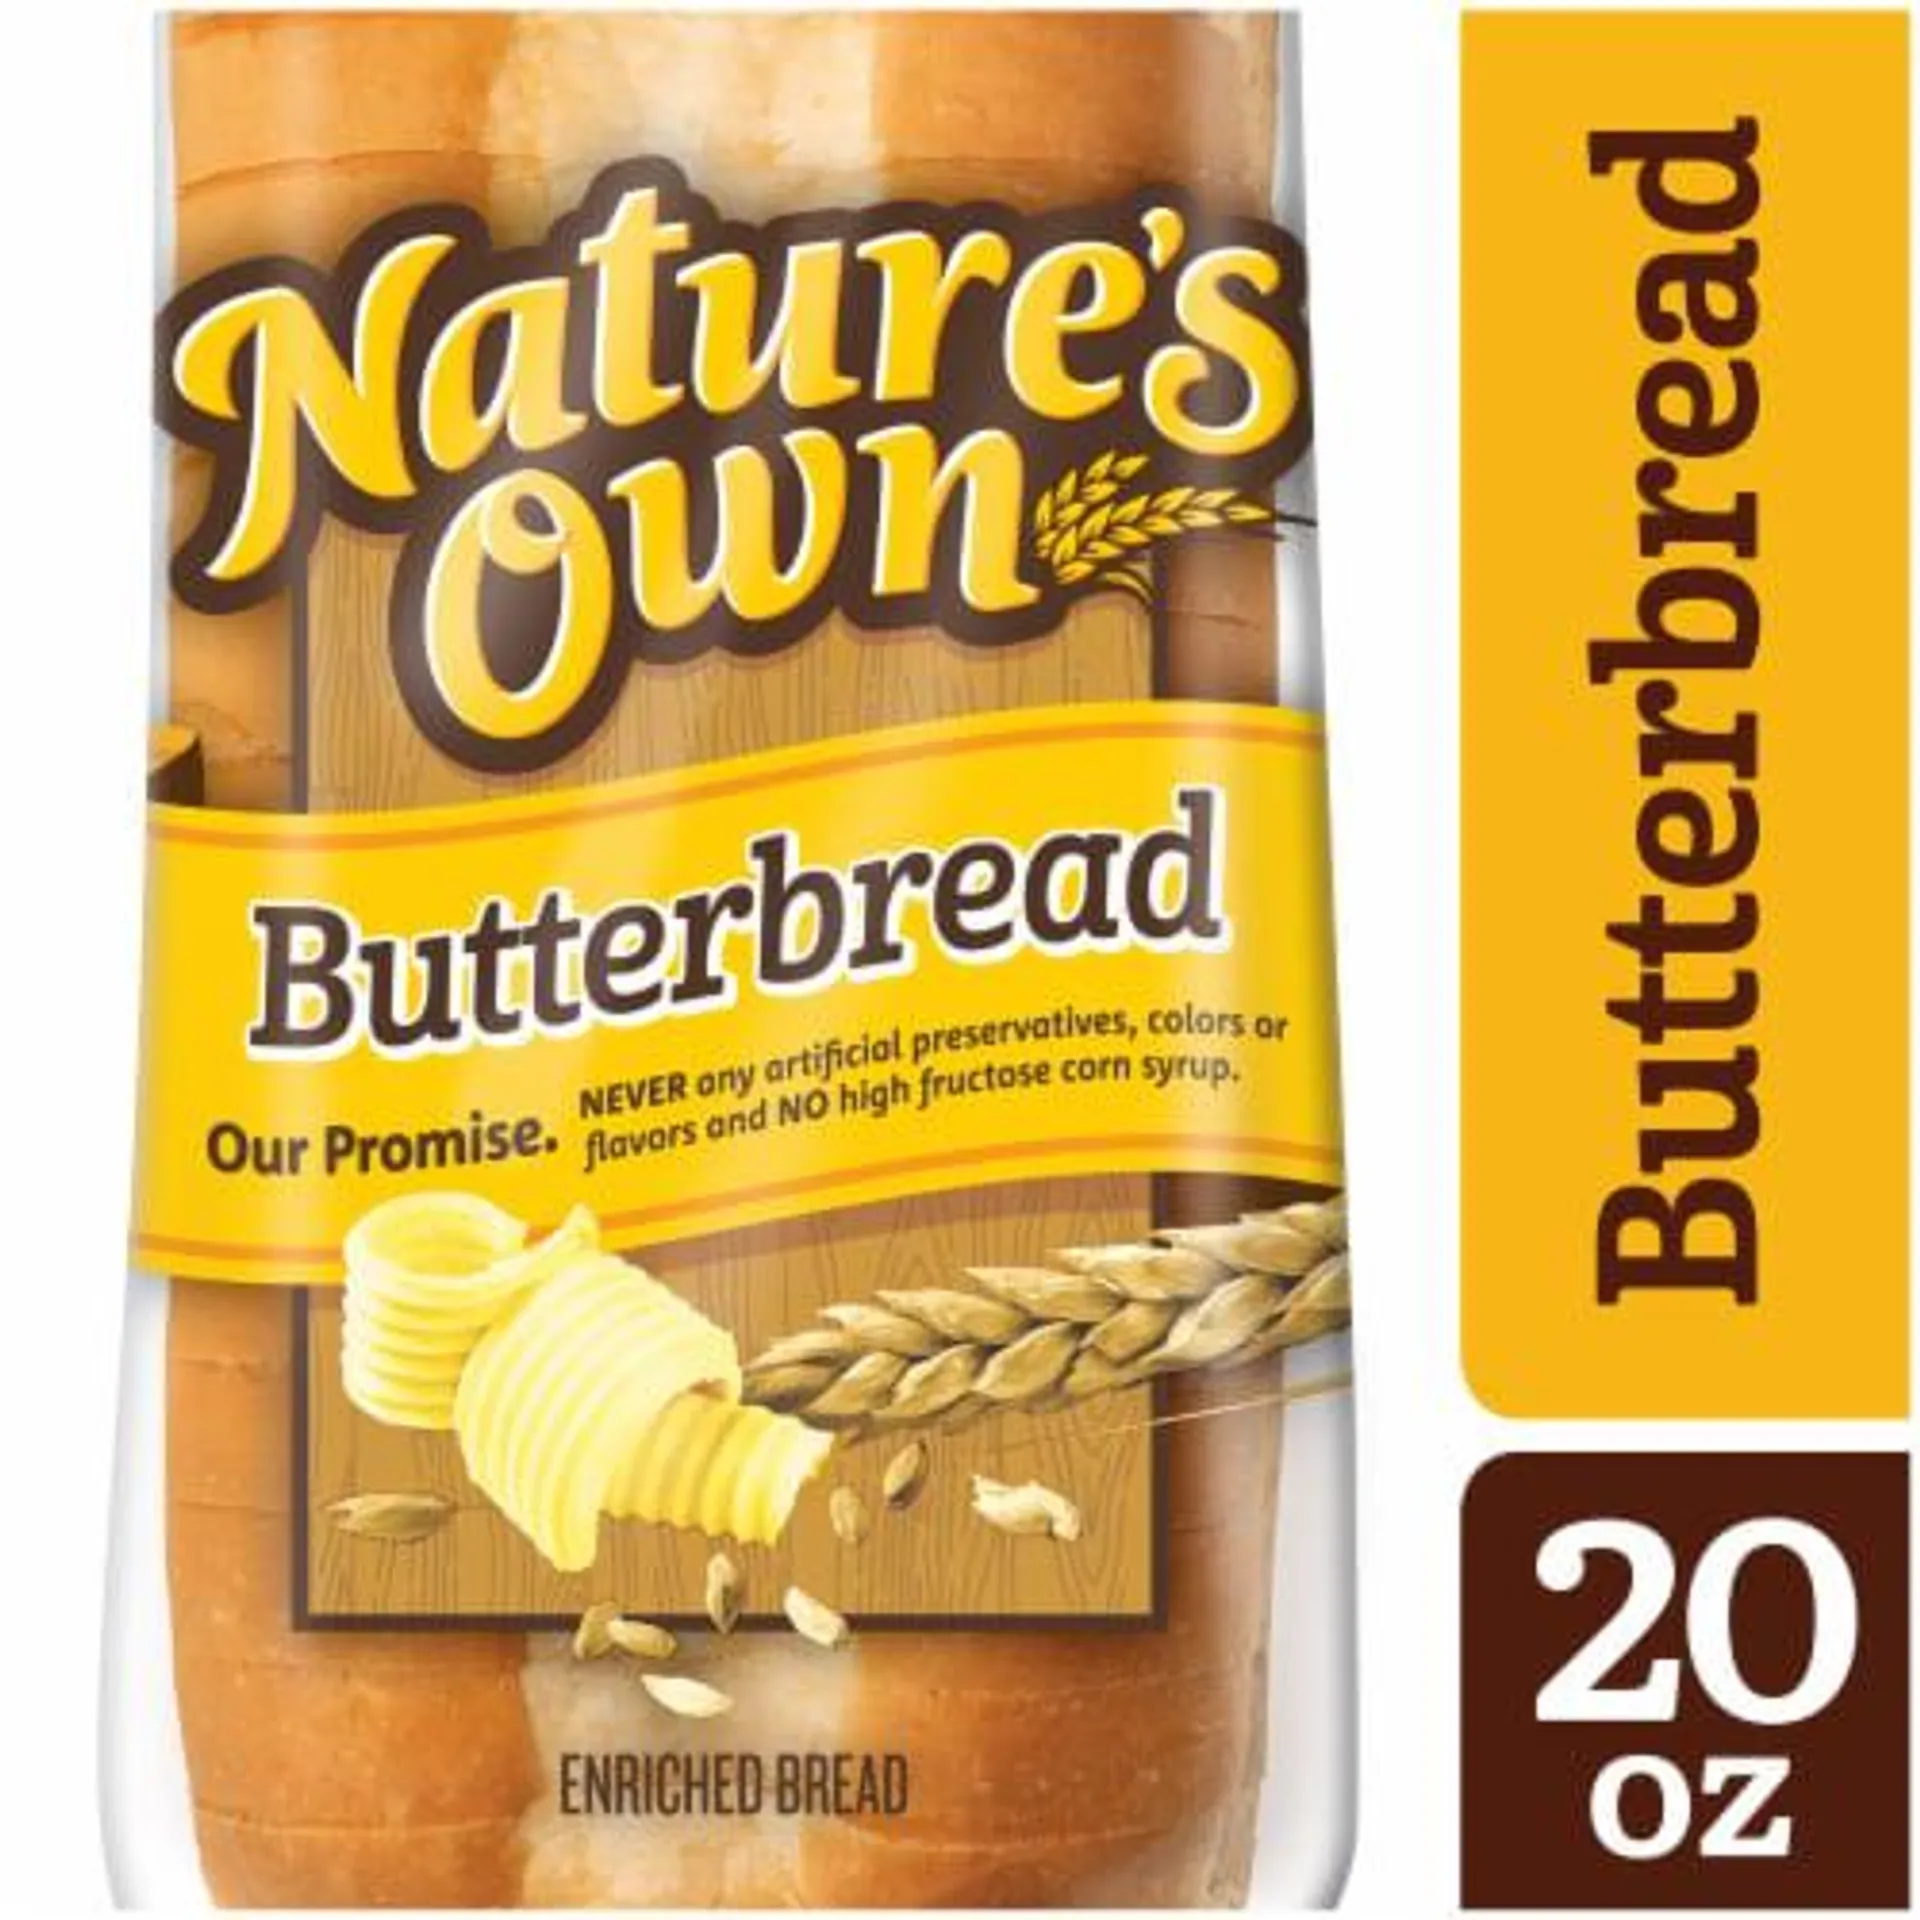 Nature's Own Butterbread Sliced White Bread